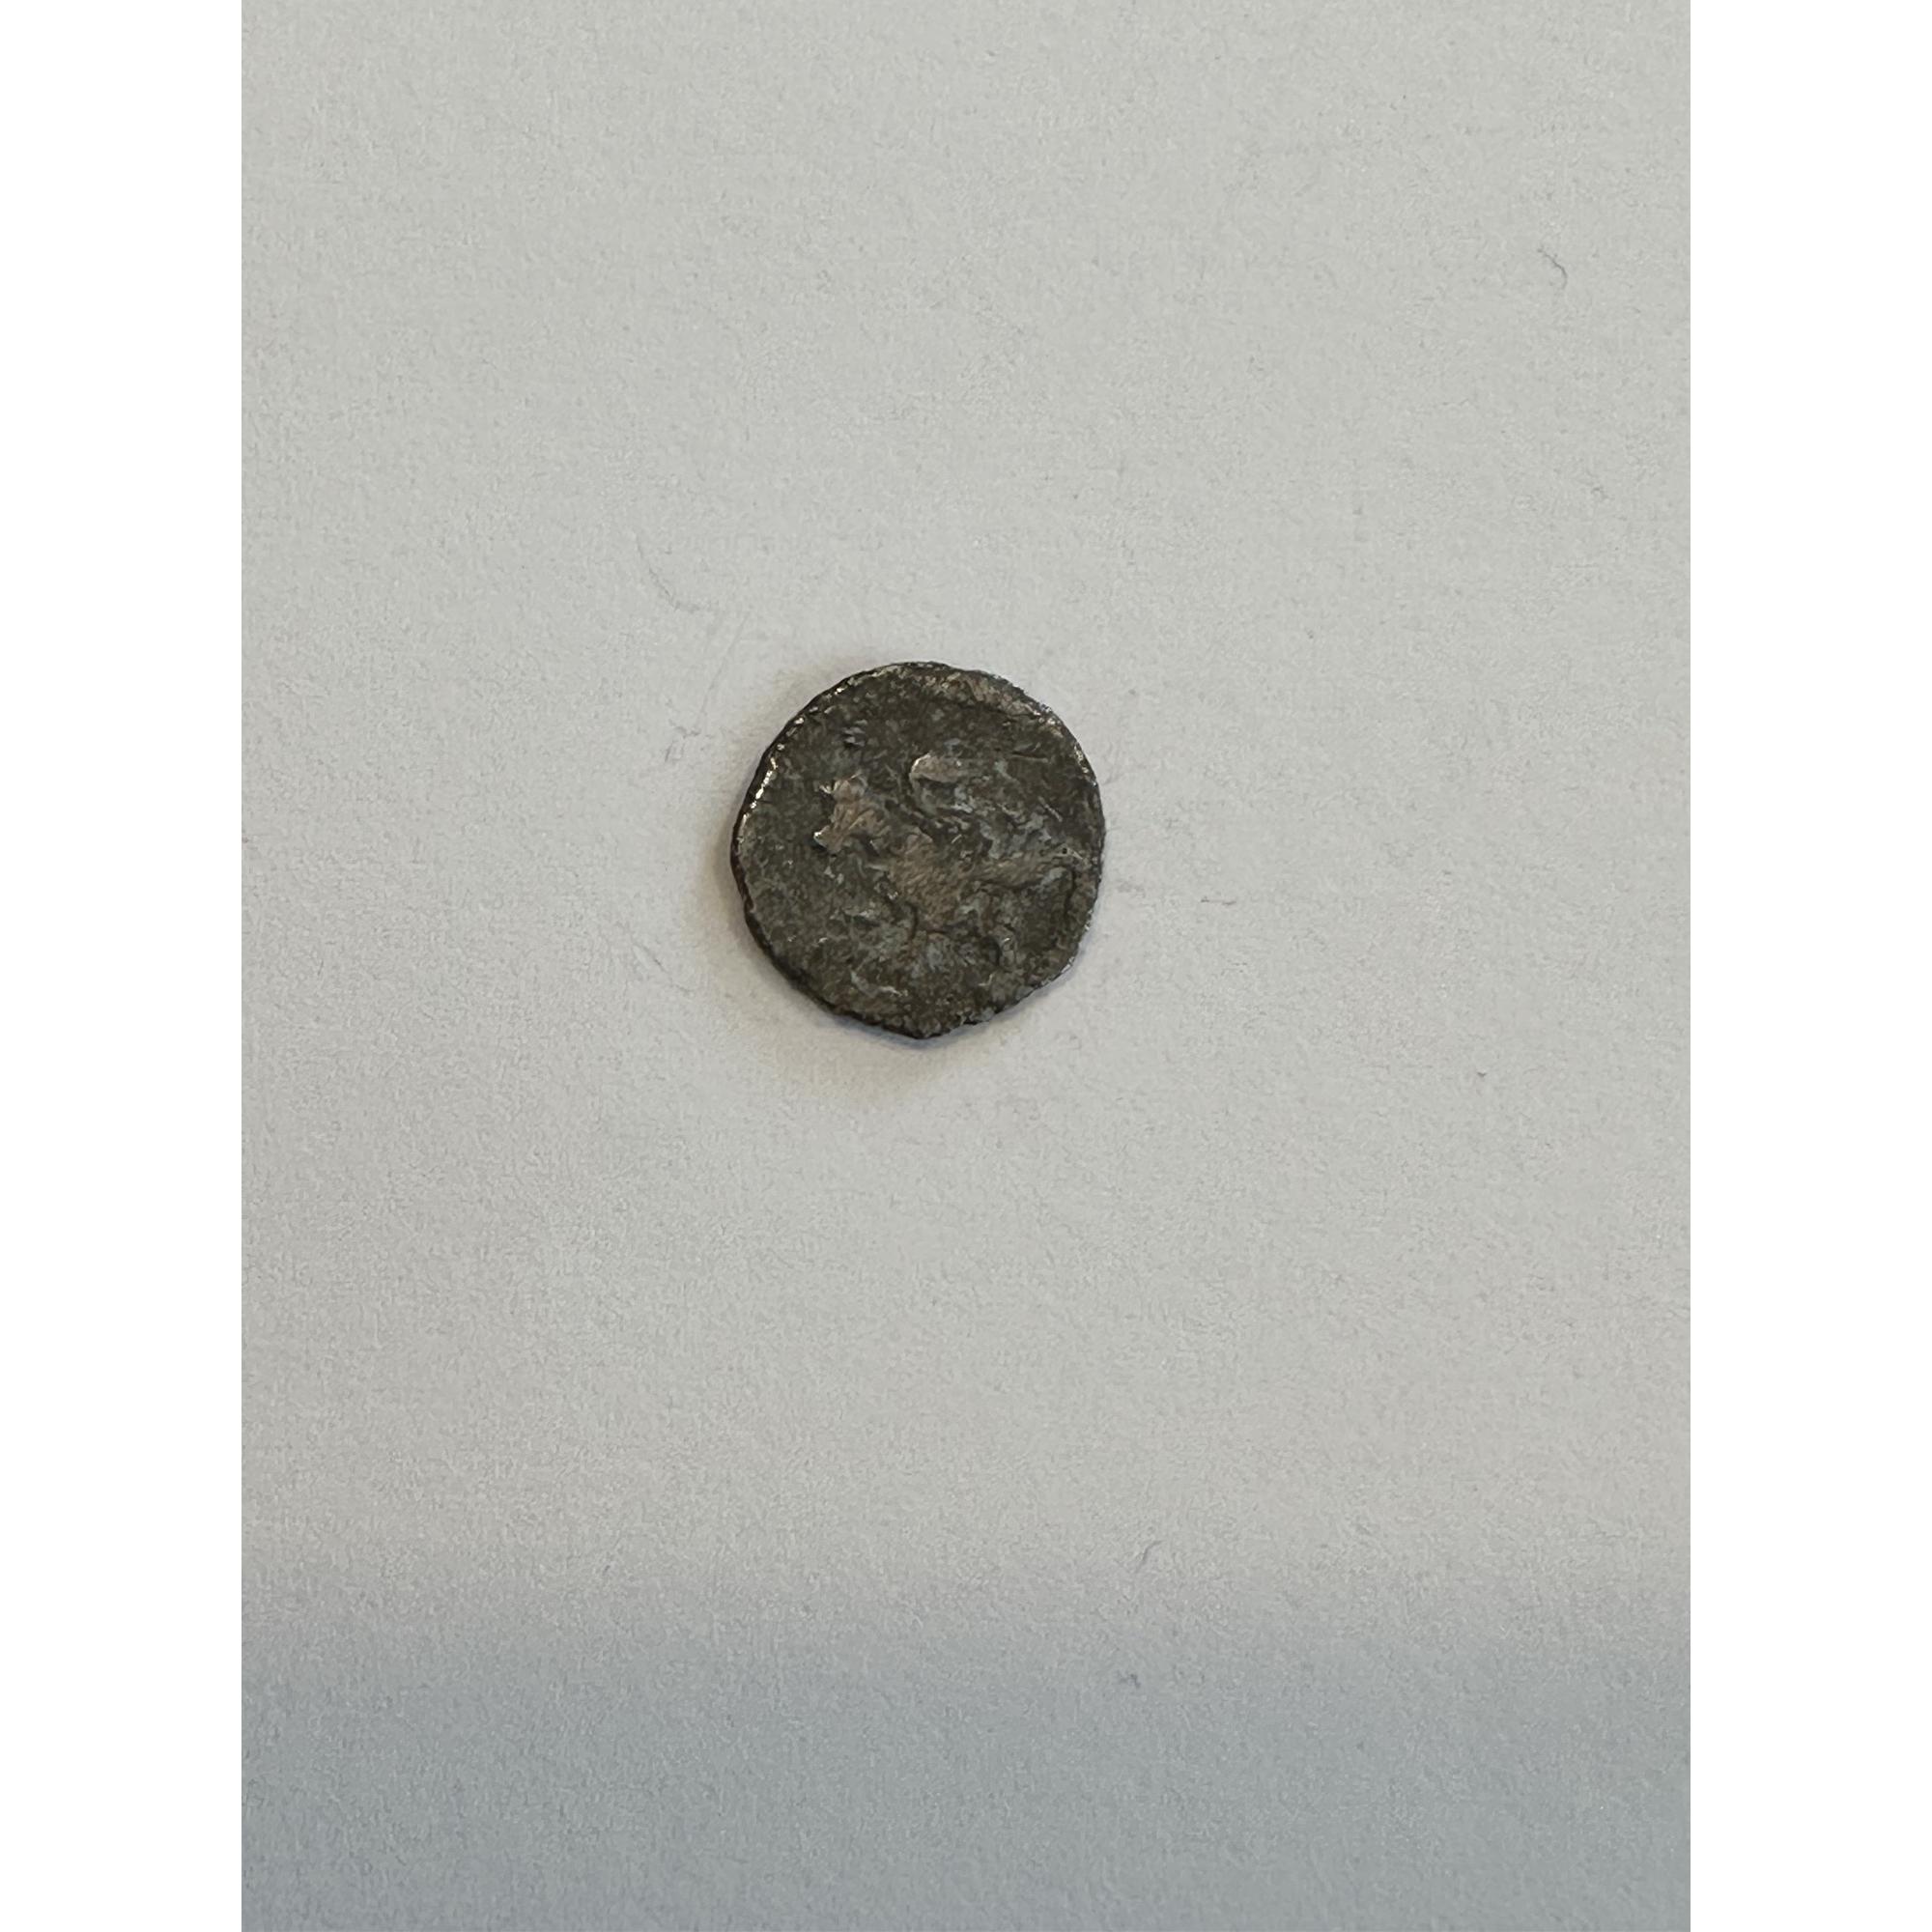 Shipwreck Silver coin, 1/4 Reale Coin, Early 1600s Prehistoric Online